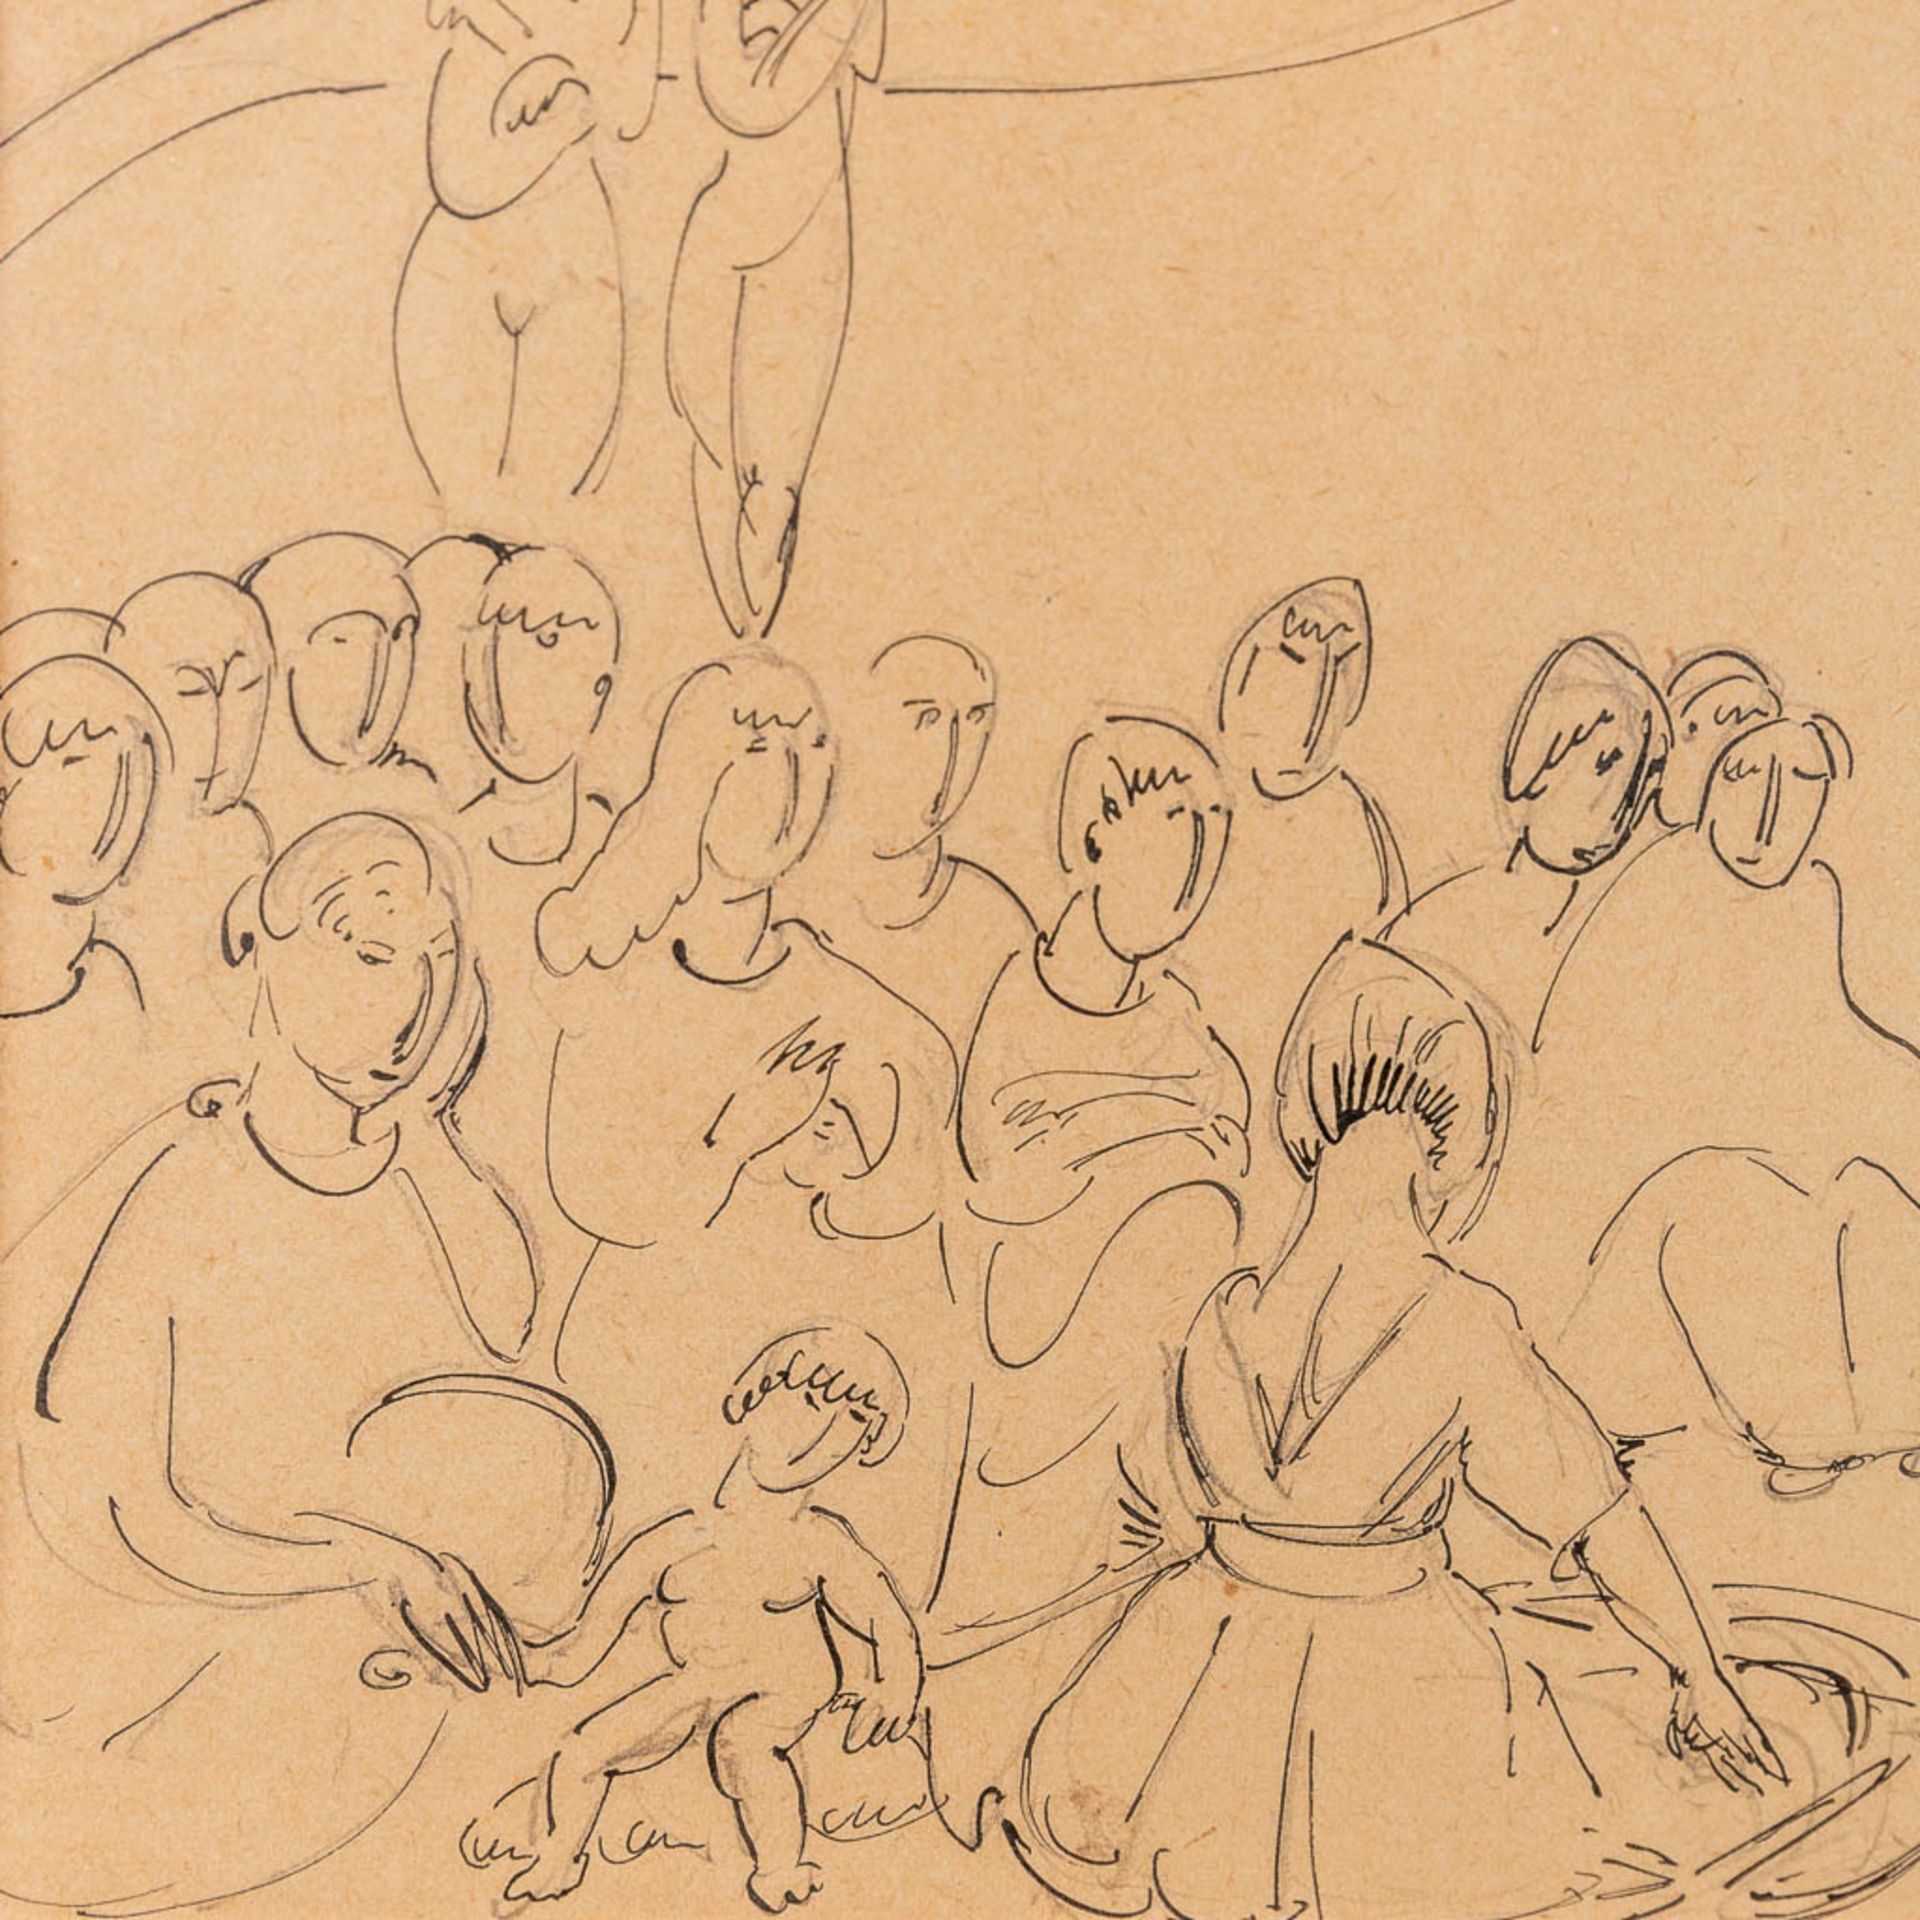 Paul JOOSTENS (1889-1960) 'No Title', a drawing, pencil on paper. (23,5 x 32,5cm) - Image 3 of 9